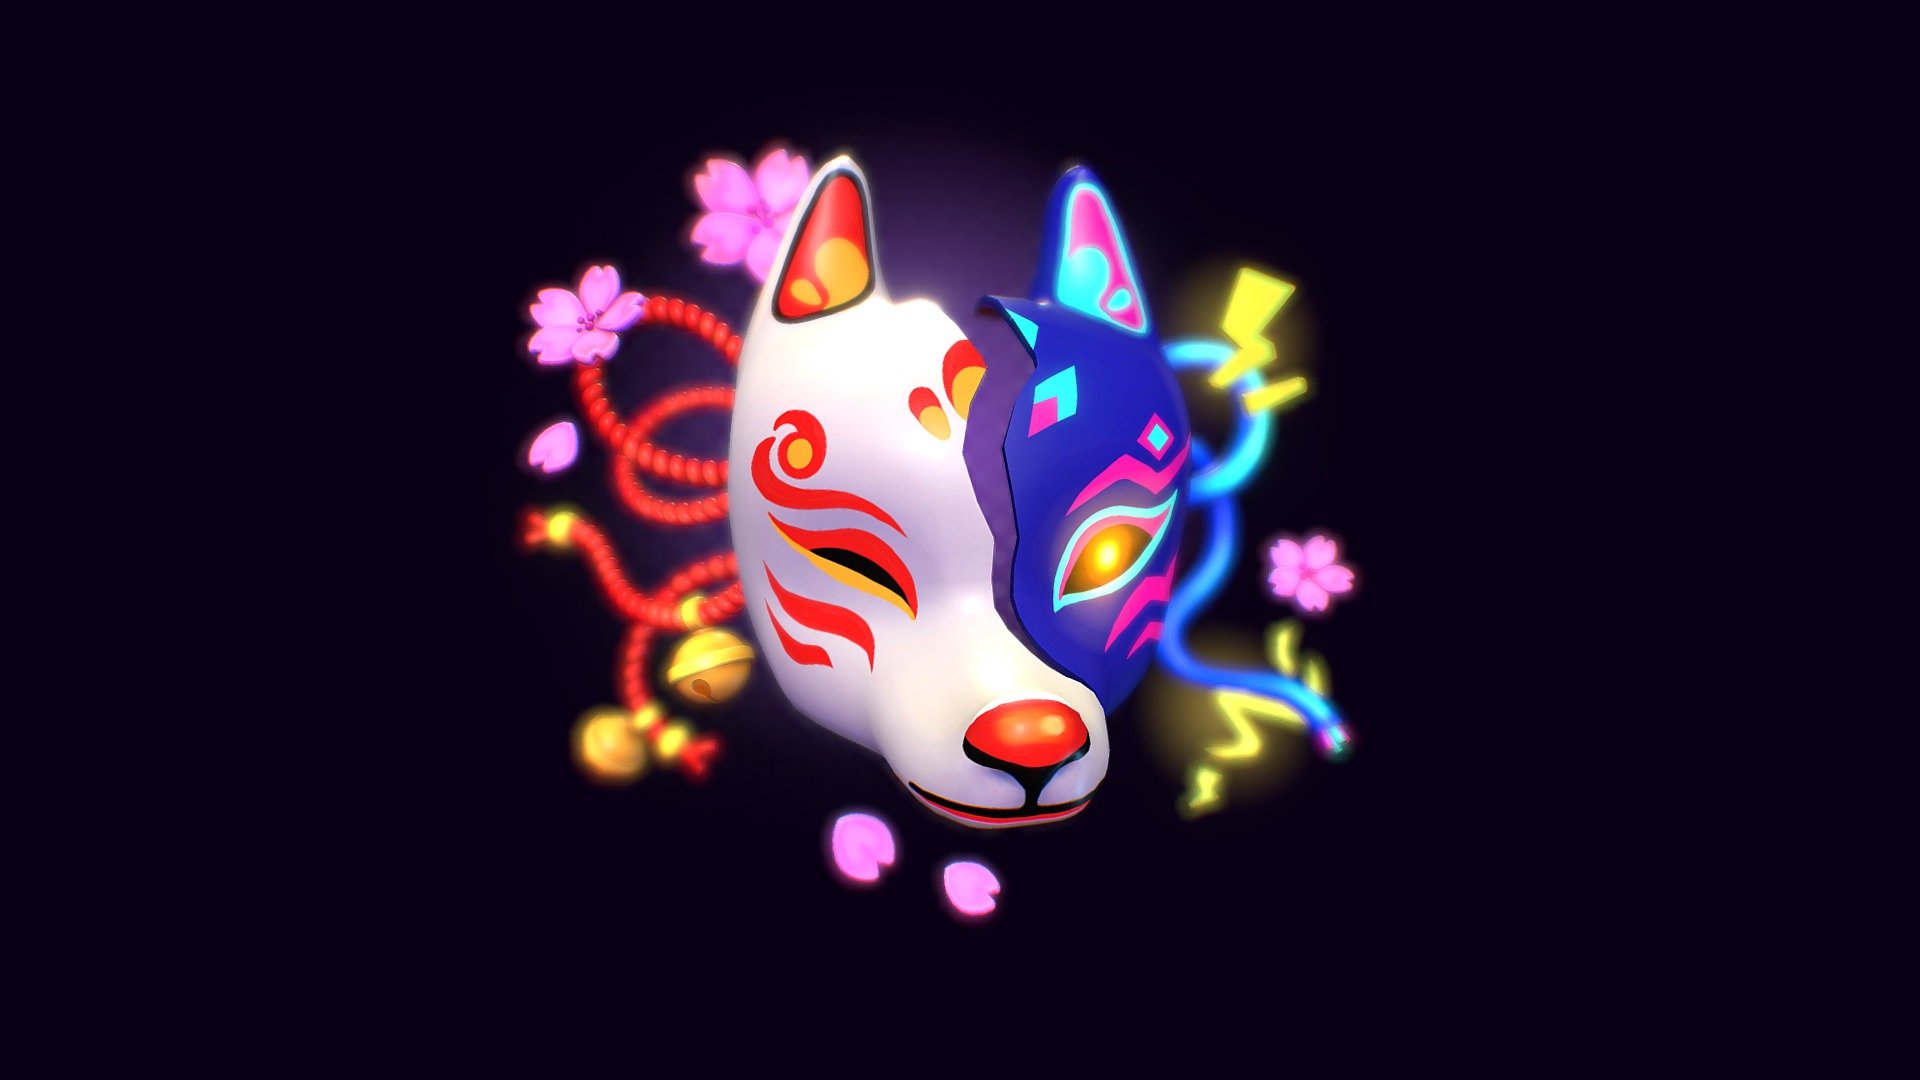 I wanted to model a kitsune mask for a long time .. but couldn't decide in what style should I make it.. a traditional white? or a cool cyberpunk dark version?
so I thought, why not both?
Made my own concept this time 3d model